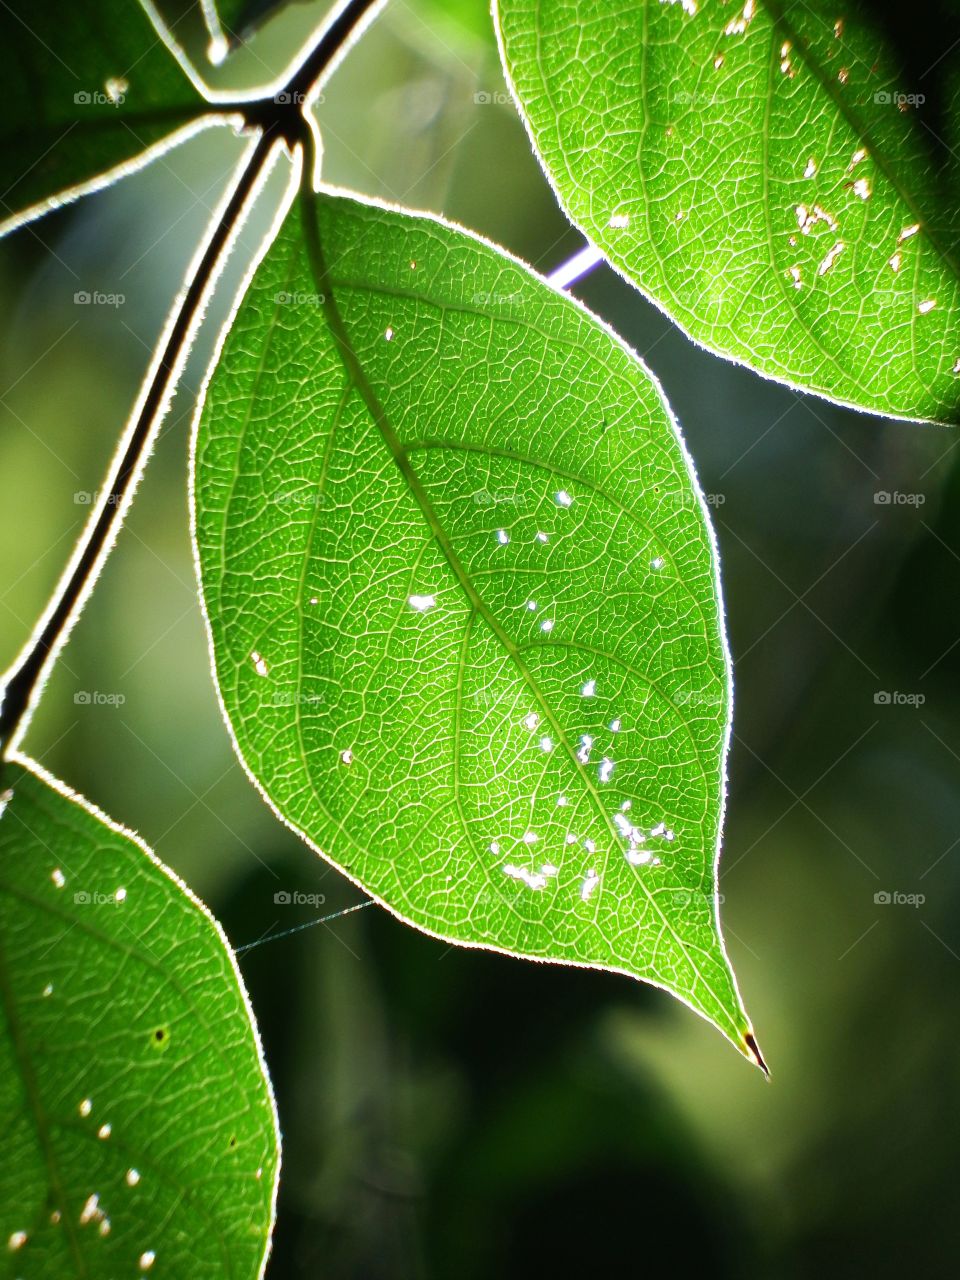 Green leaves closeup with light shining though them on a summer morning.